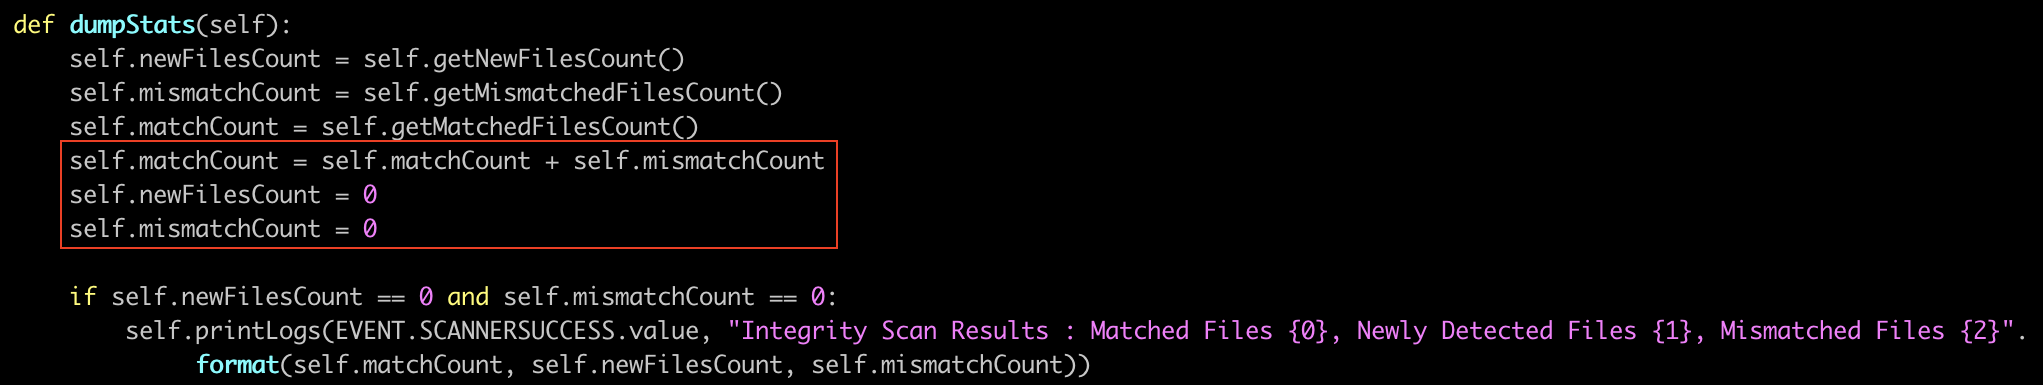 Modified Integrity Checker Tool Code in scanner.py